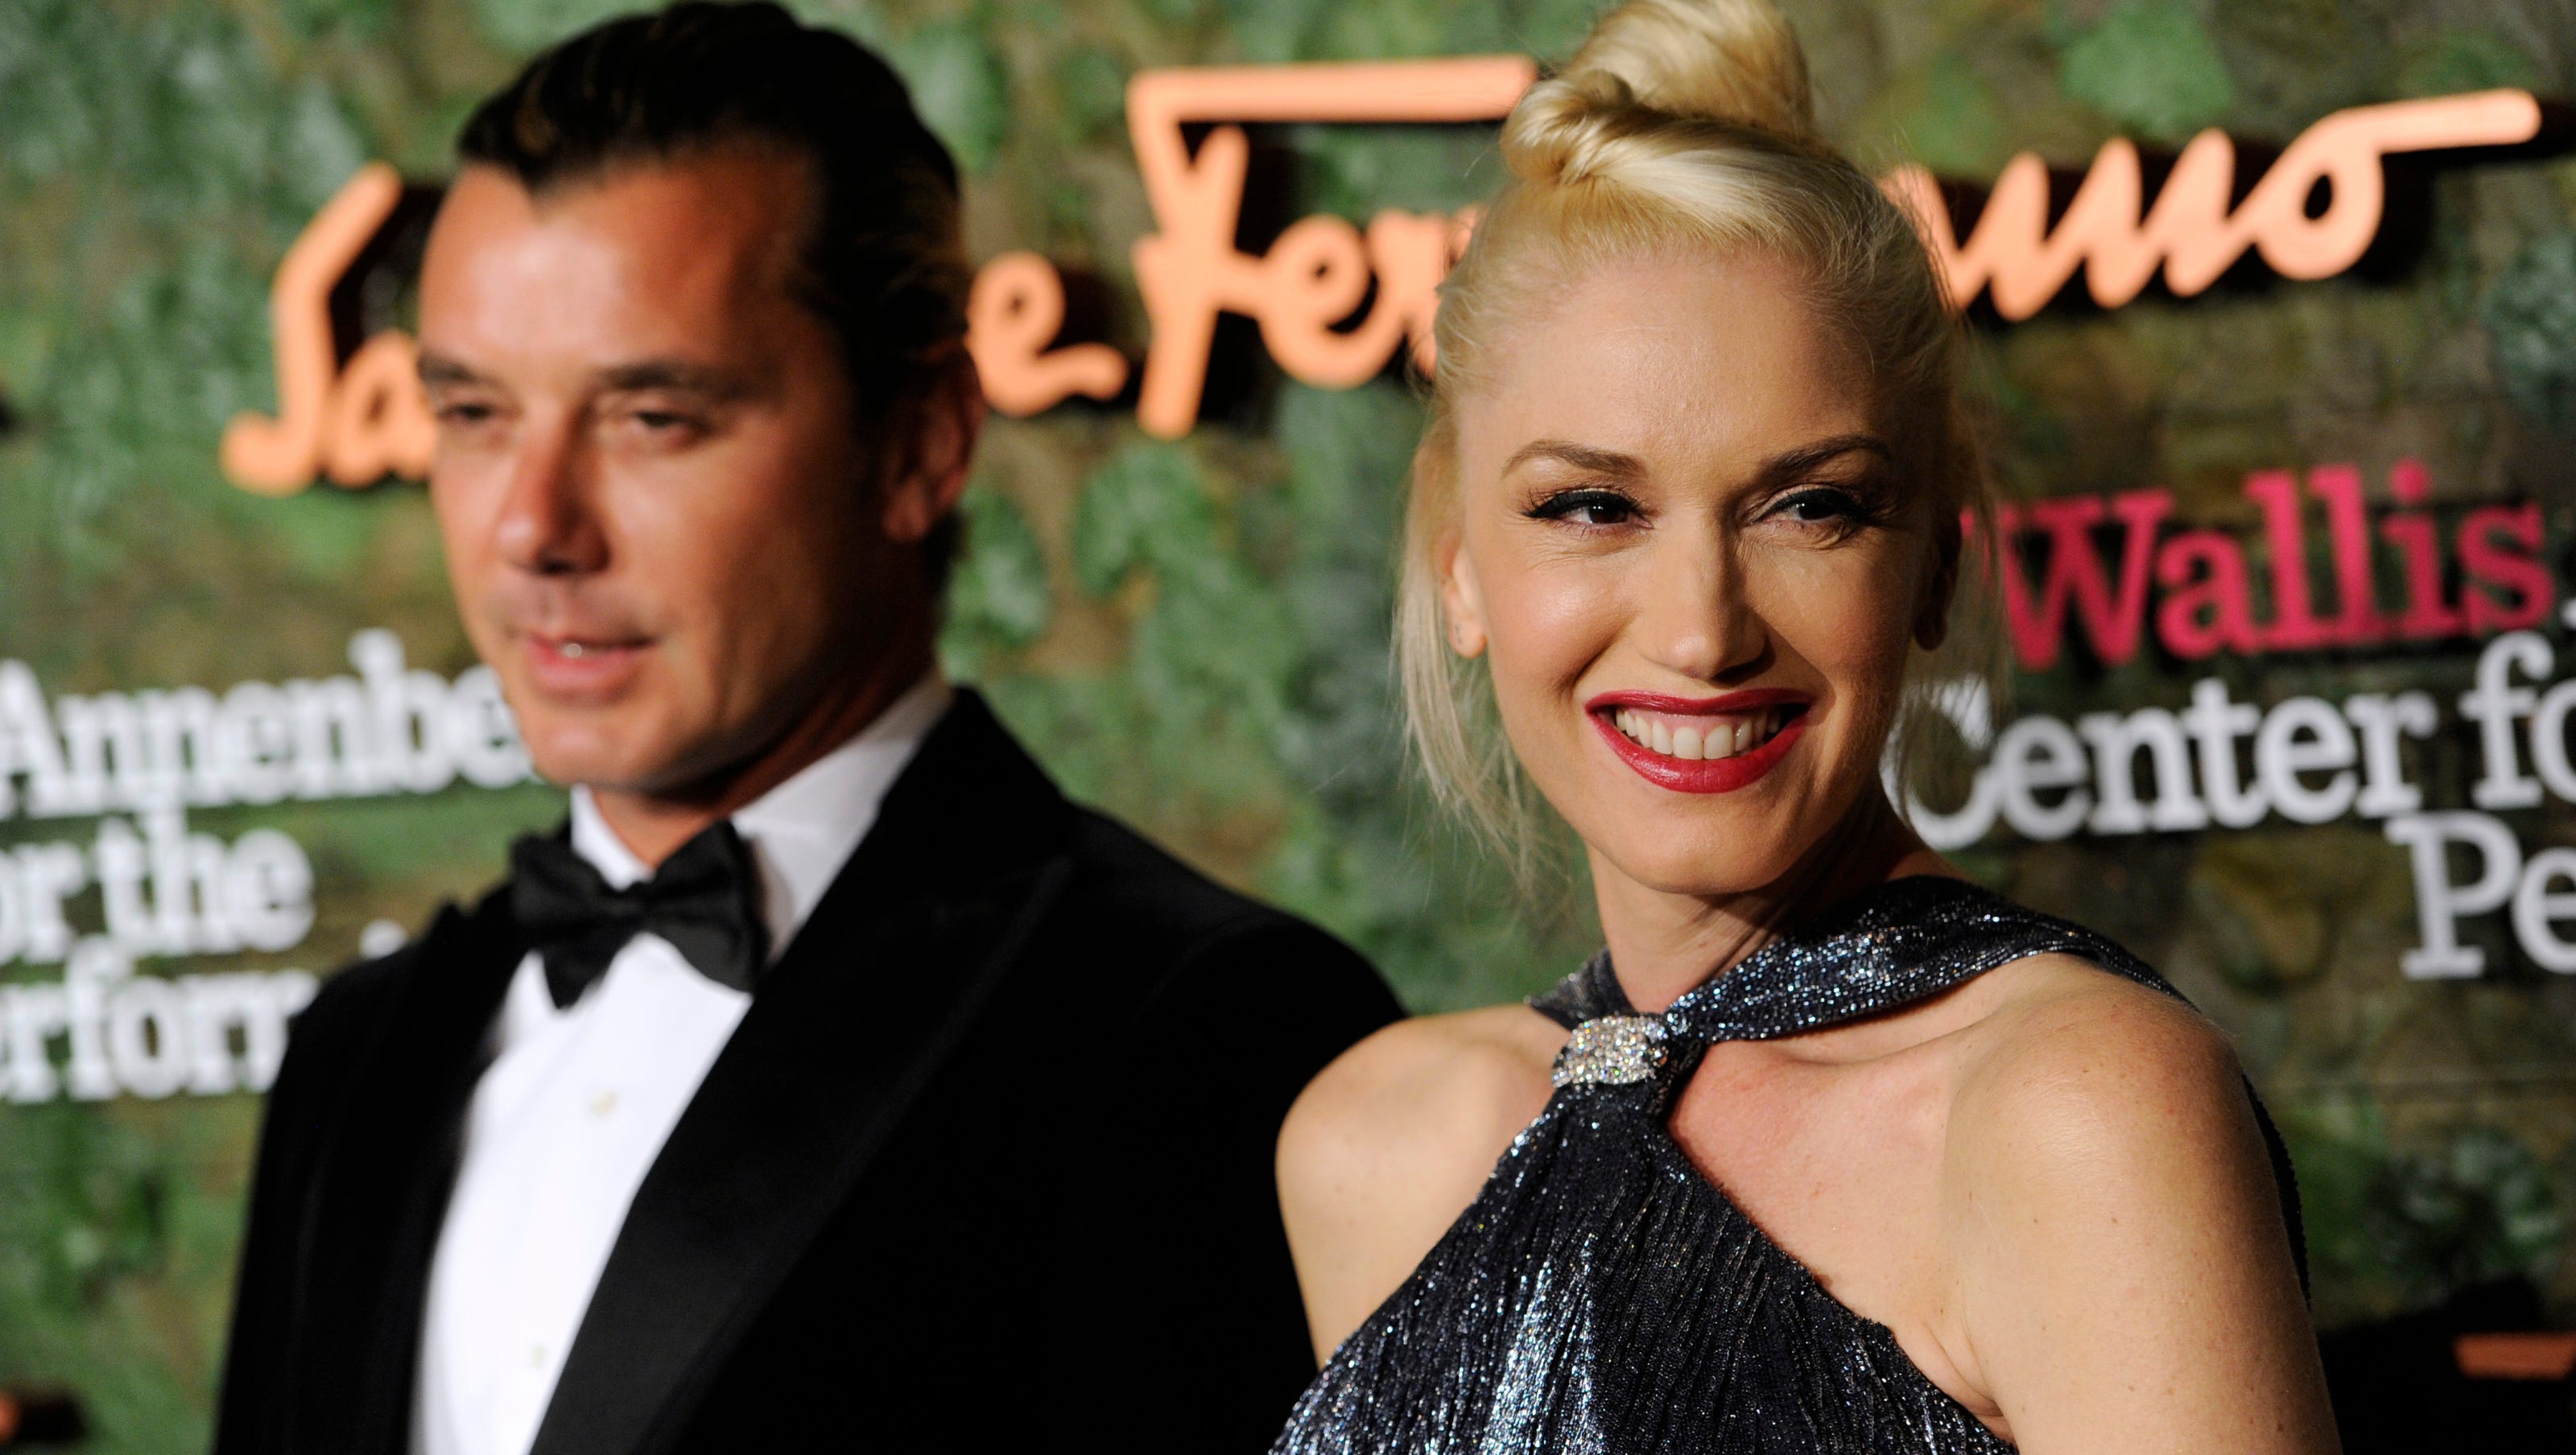 Why all the celebrity divorces lately?